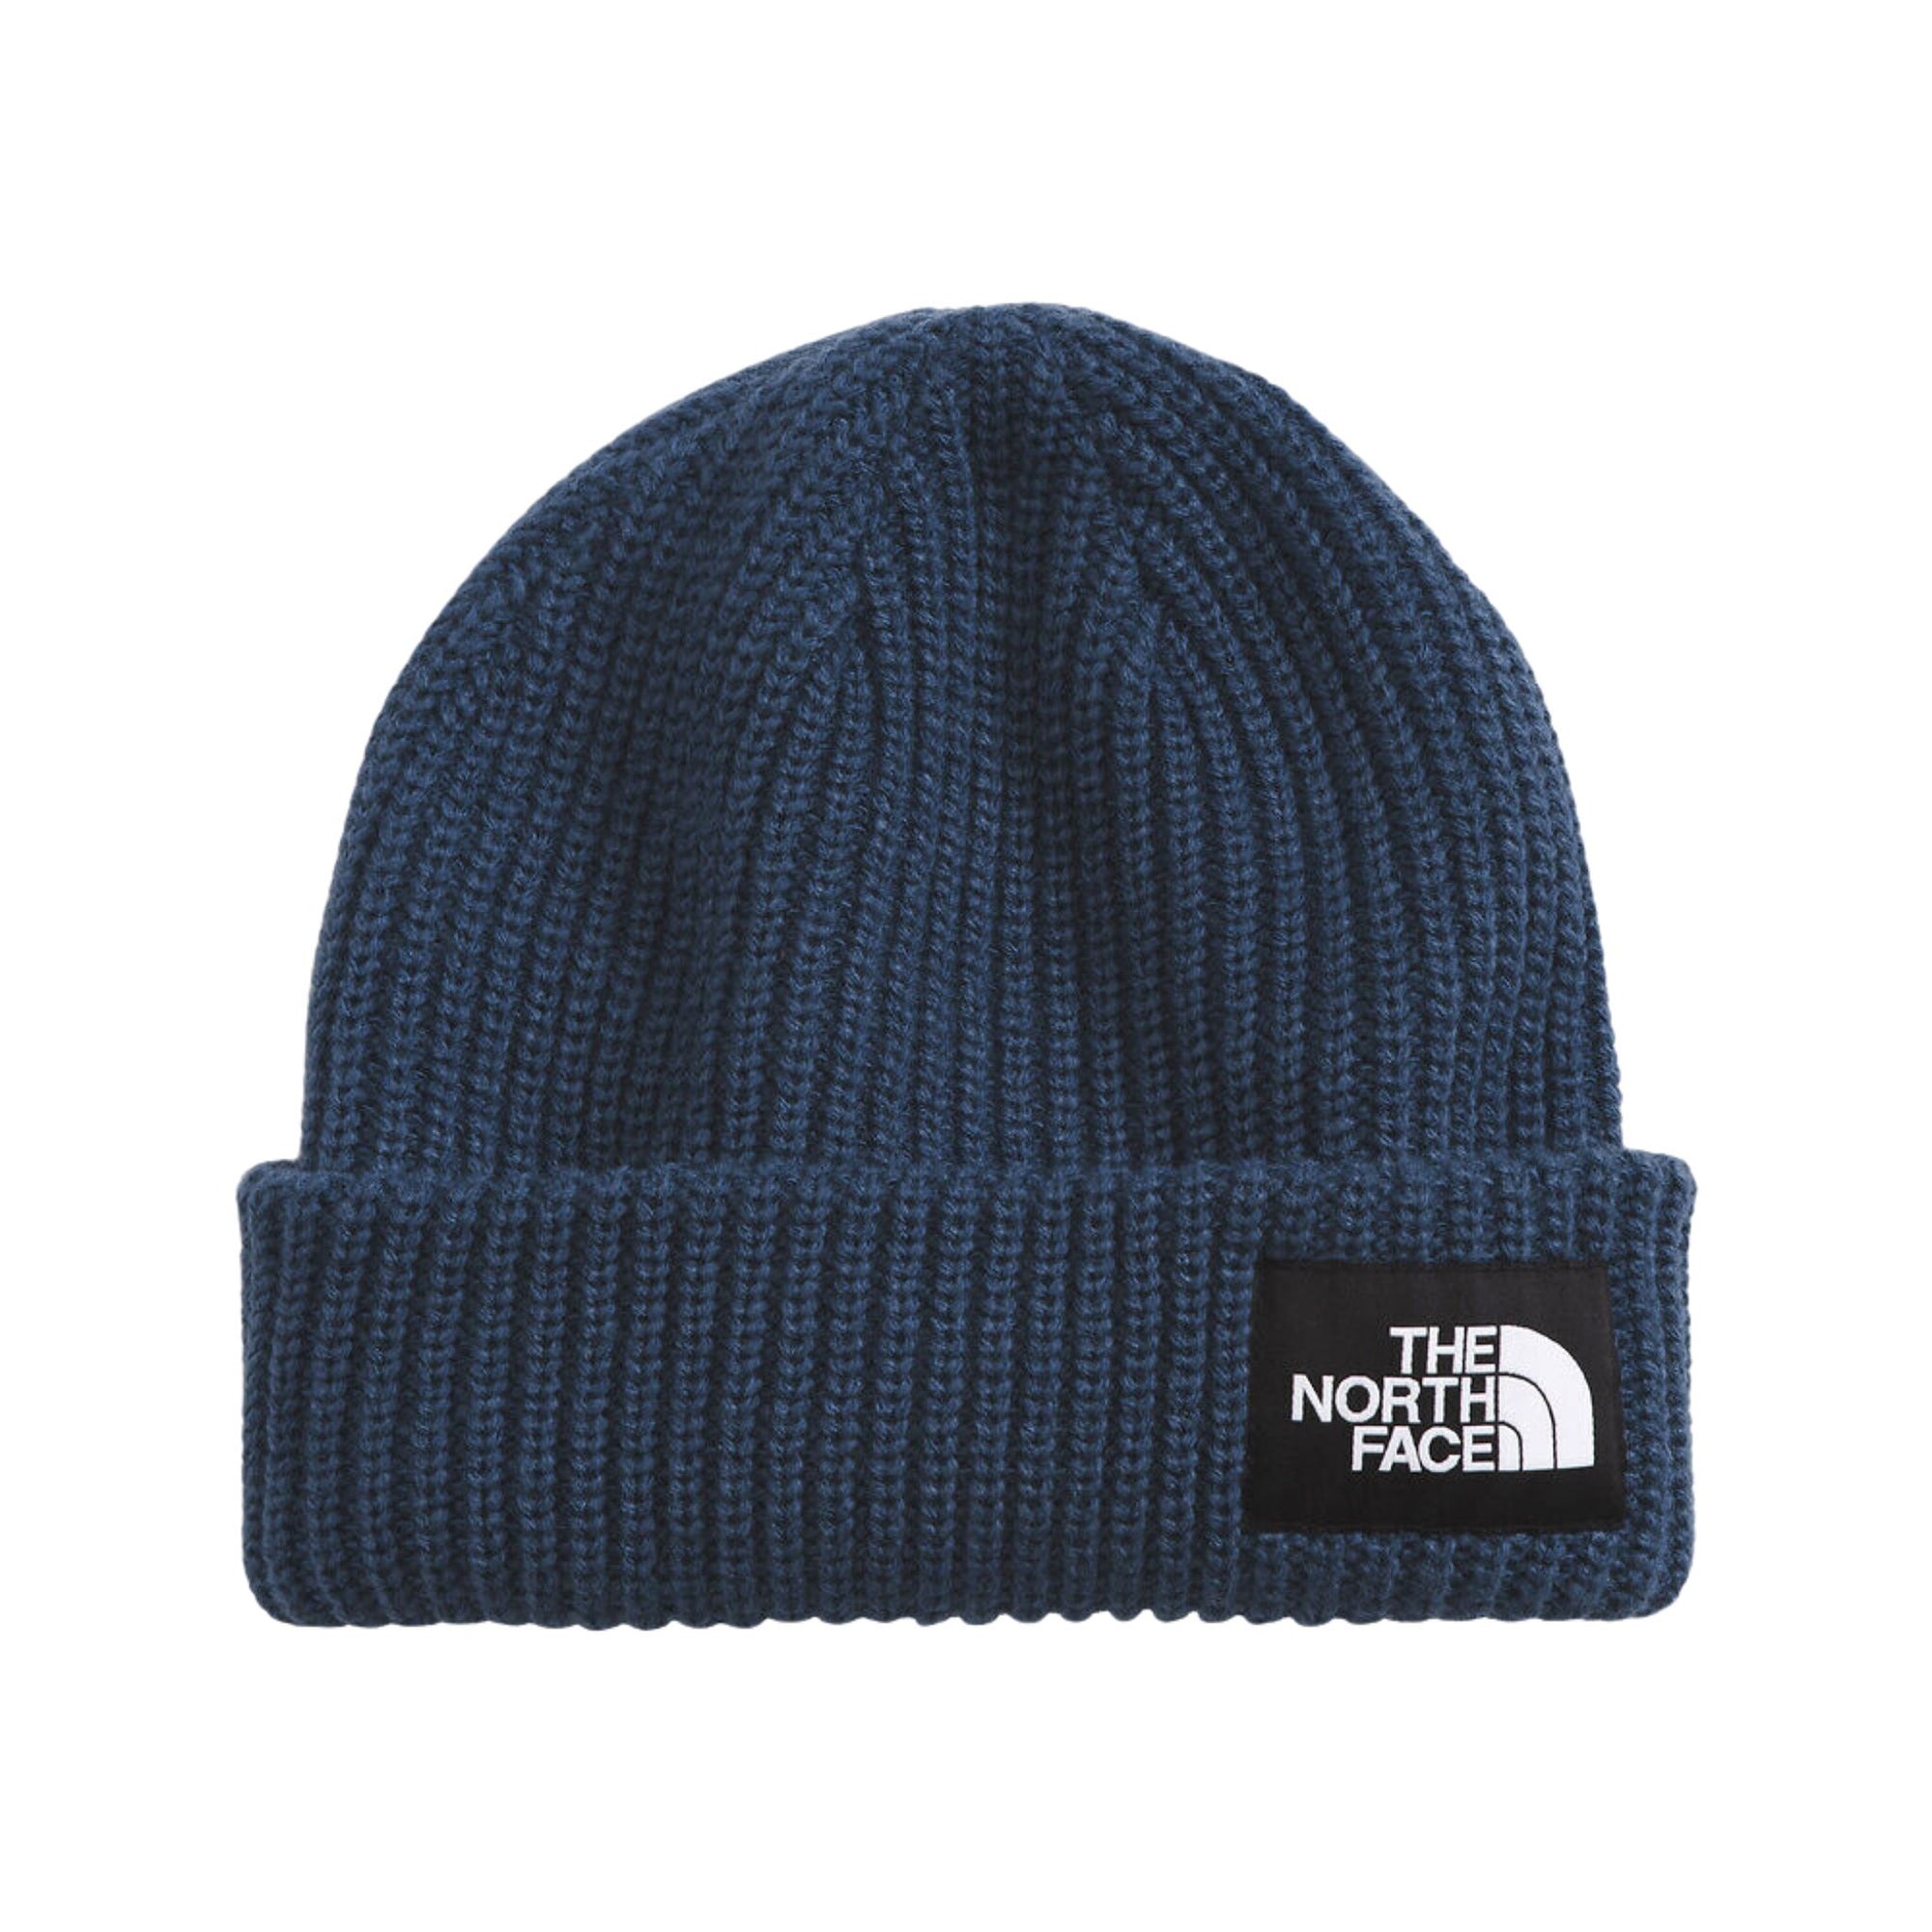 Kids The North Face Salty Dog Beanie - Shady Blue Beanies The North Face 